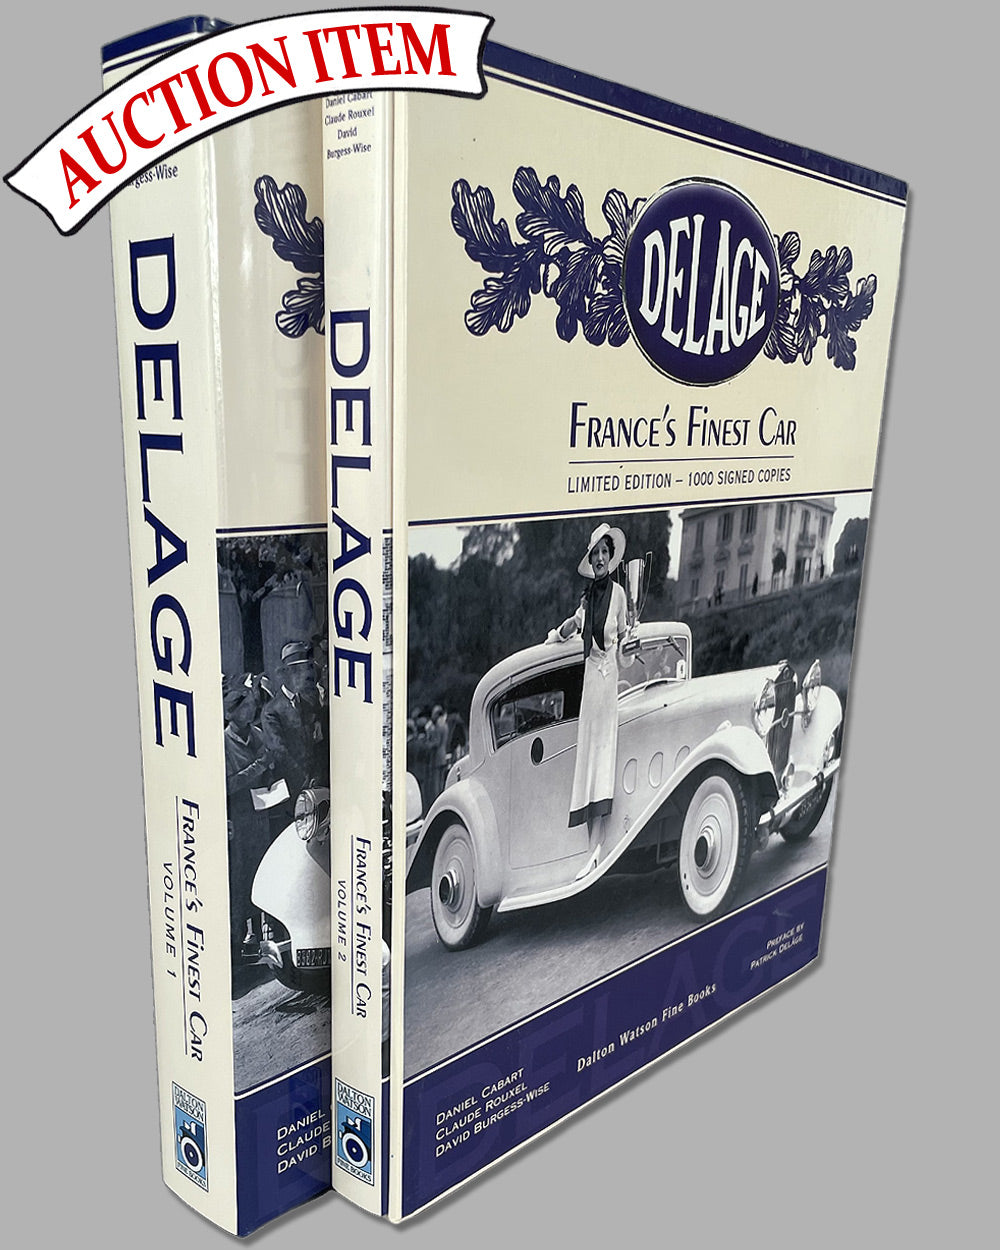 Delage, France’s Finest Car book by Daniel Cabart, Claude Rouxel & David Burgess-Wise, 2007